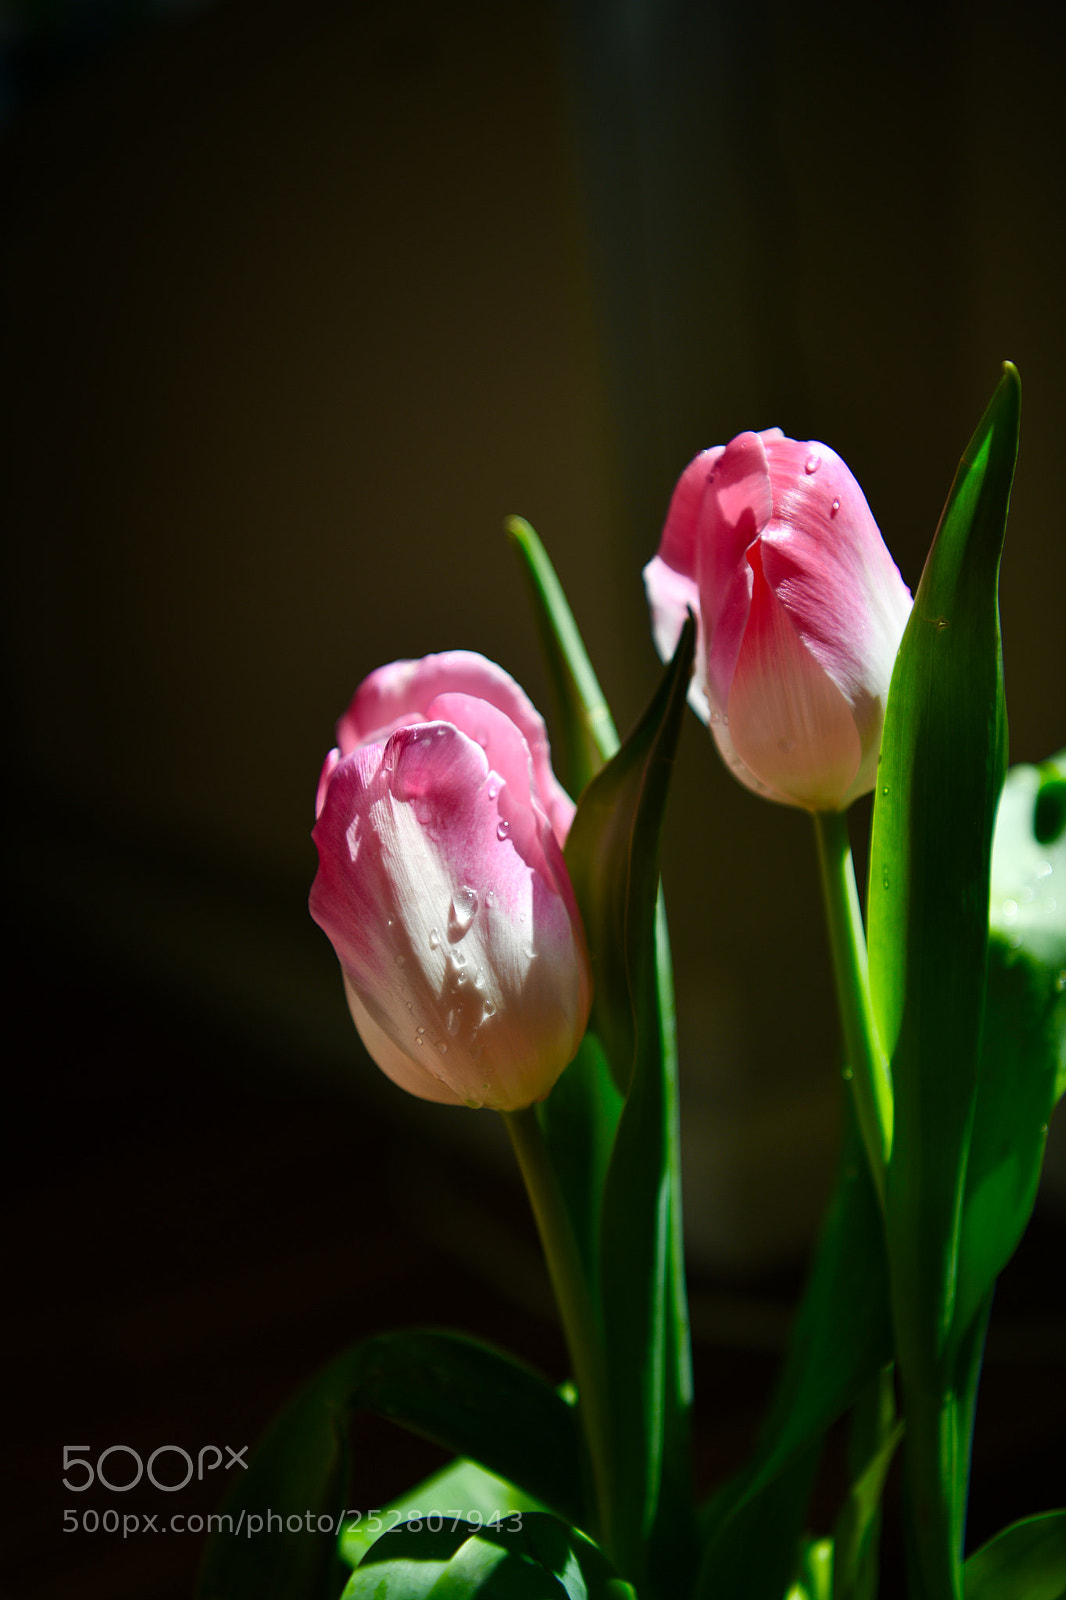 Nikon D850 sample photo. The tulips are blooming photography